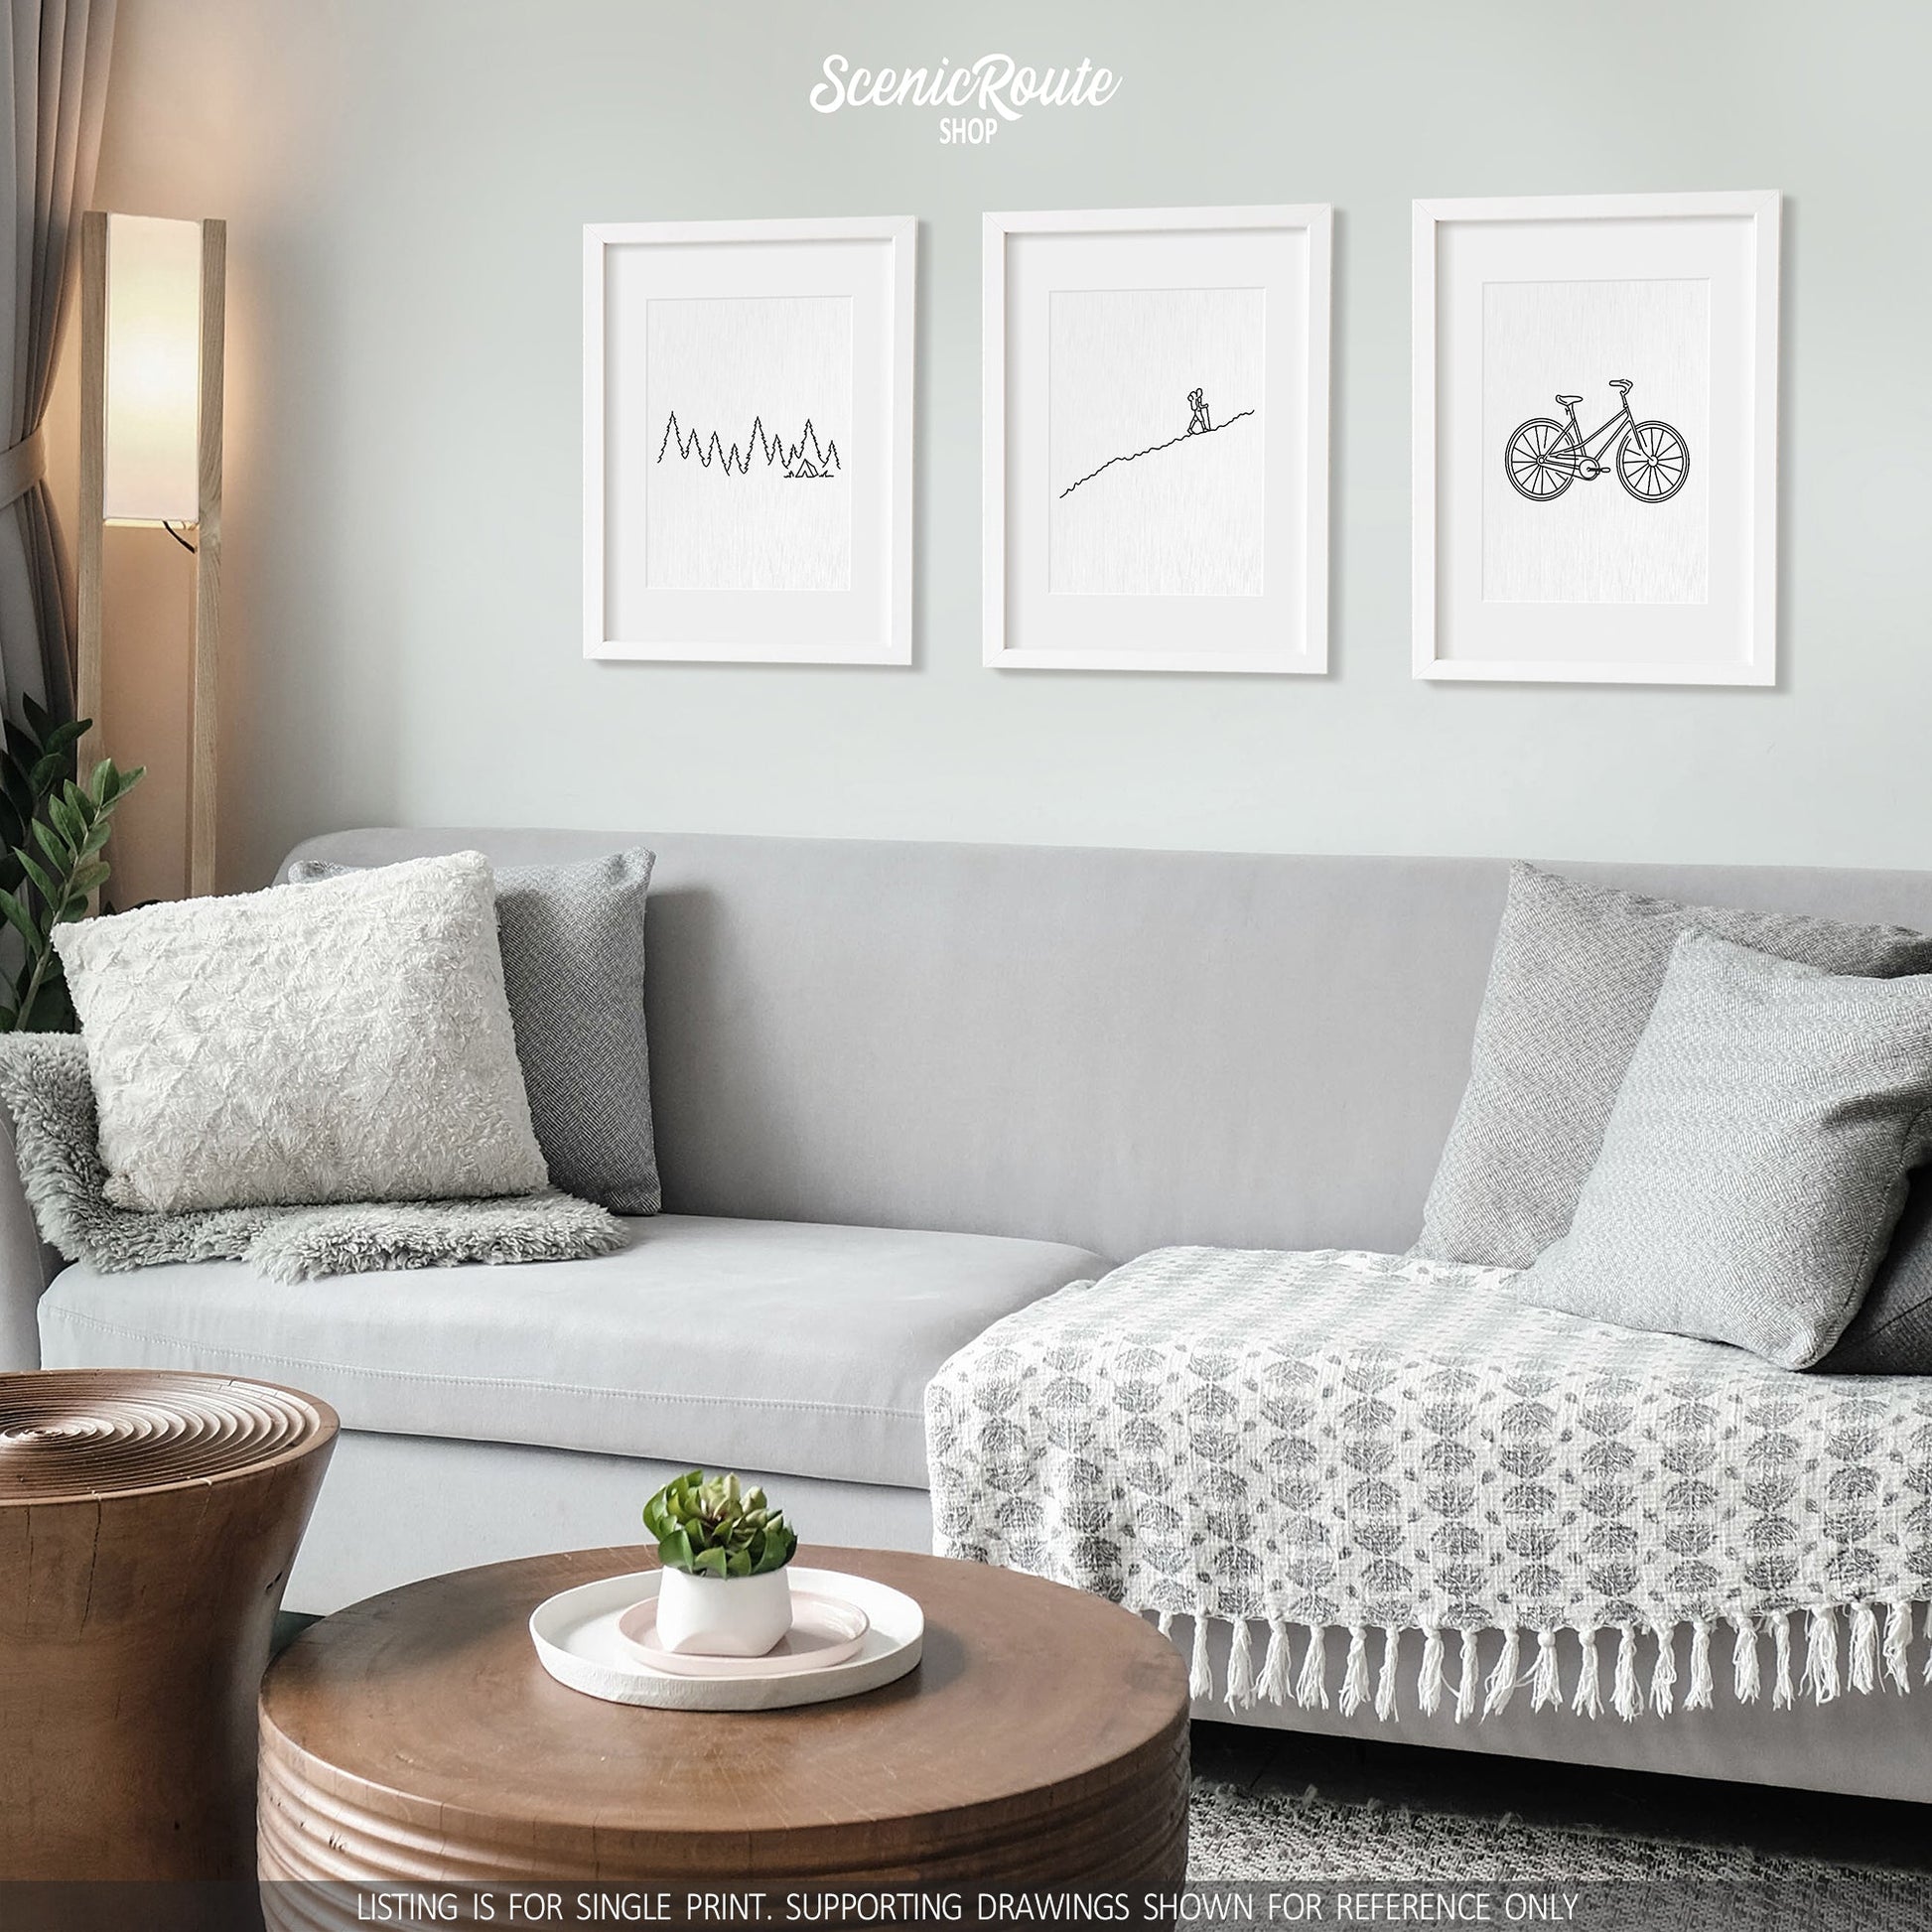 A group of three framed drawings on a white wall hanging above a couch with pillows and a blanket. The line art drawings include Camping, a person Hiking, and a Bicycle